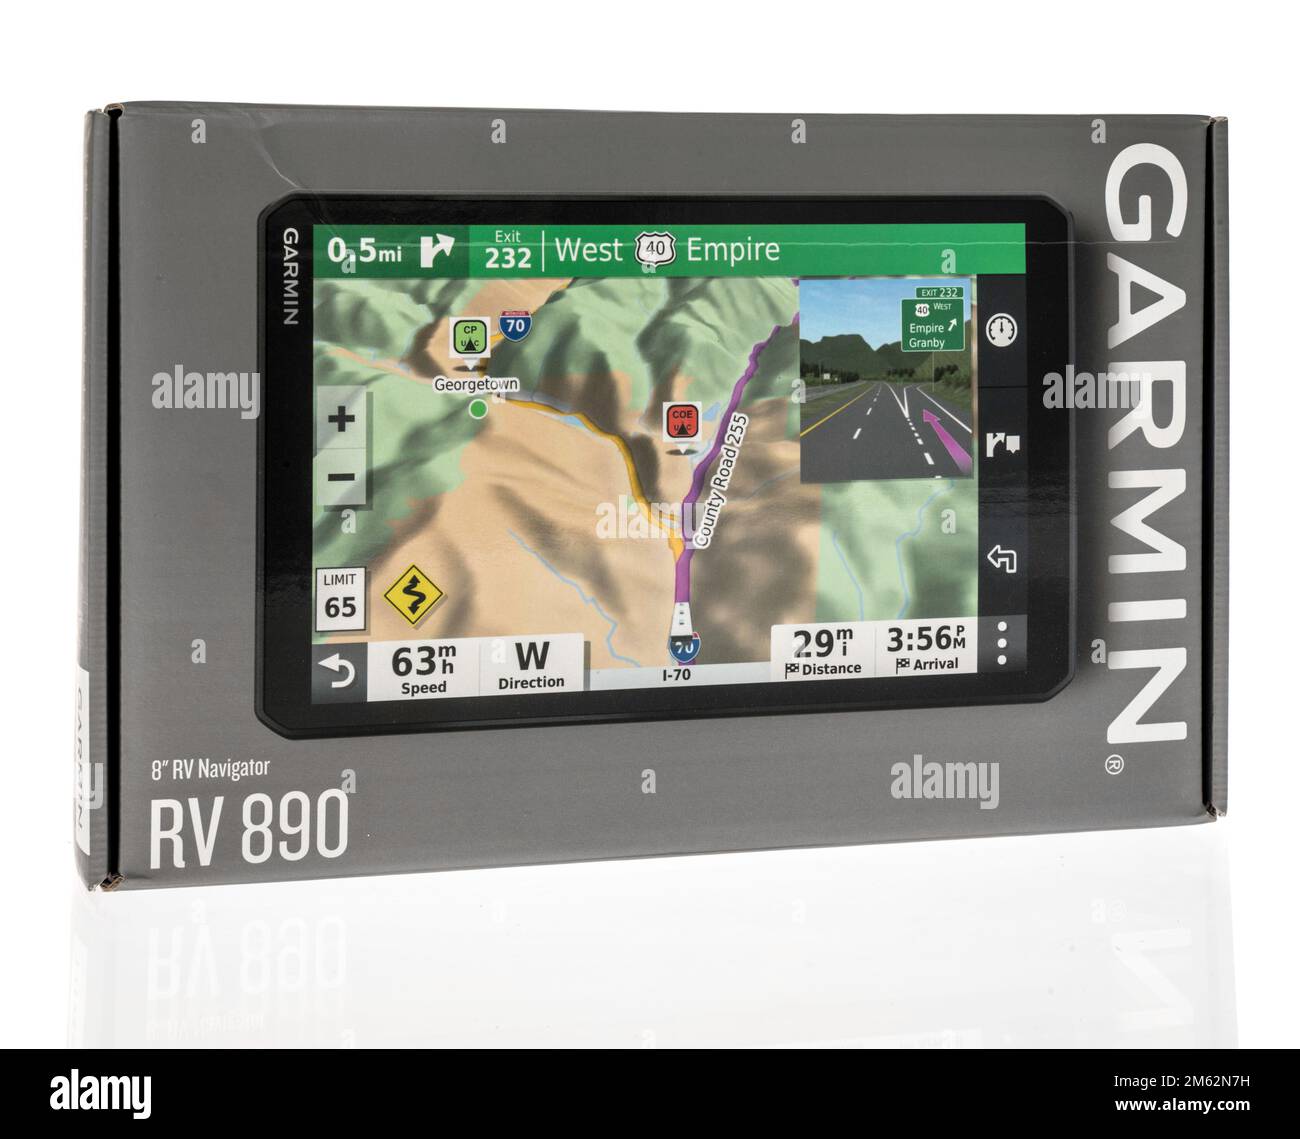 Winneconne, WI - 12 December 2022: A package of Garmin RV 8910 GPS navigation unit on an isolated background. Stock Photo